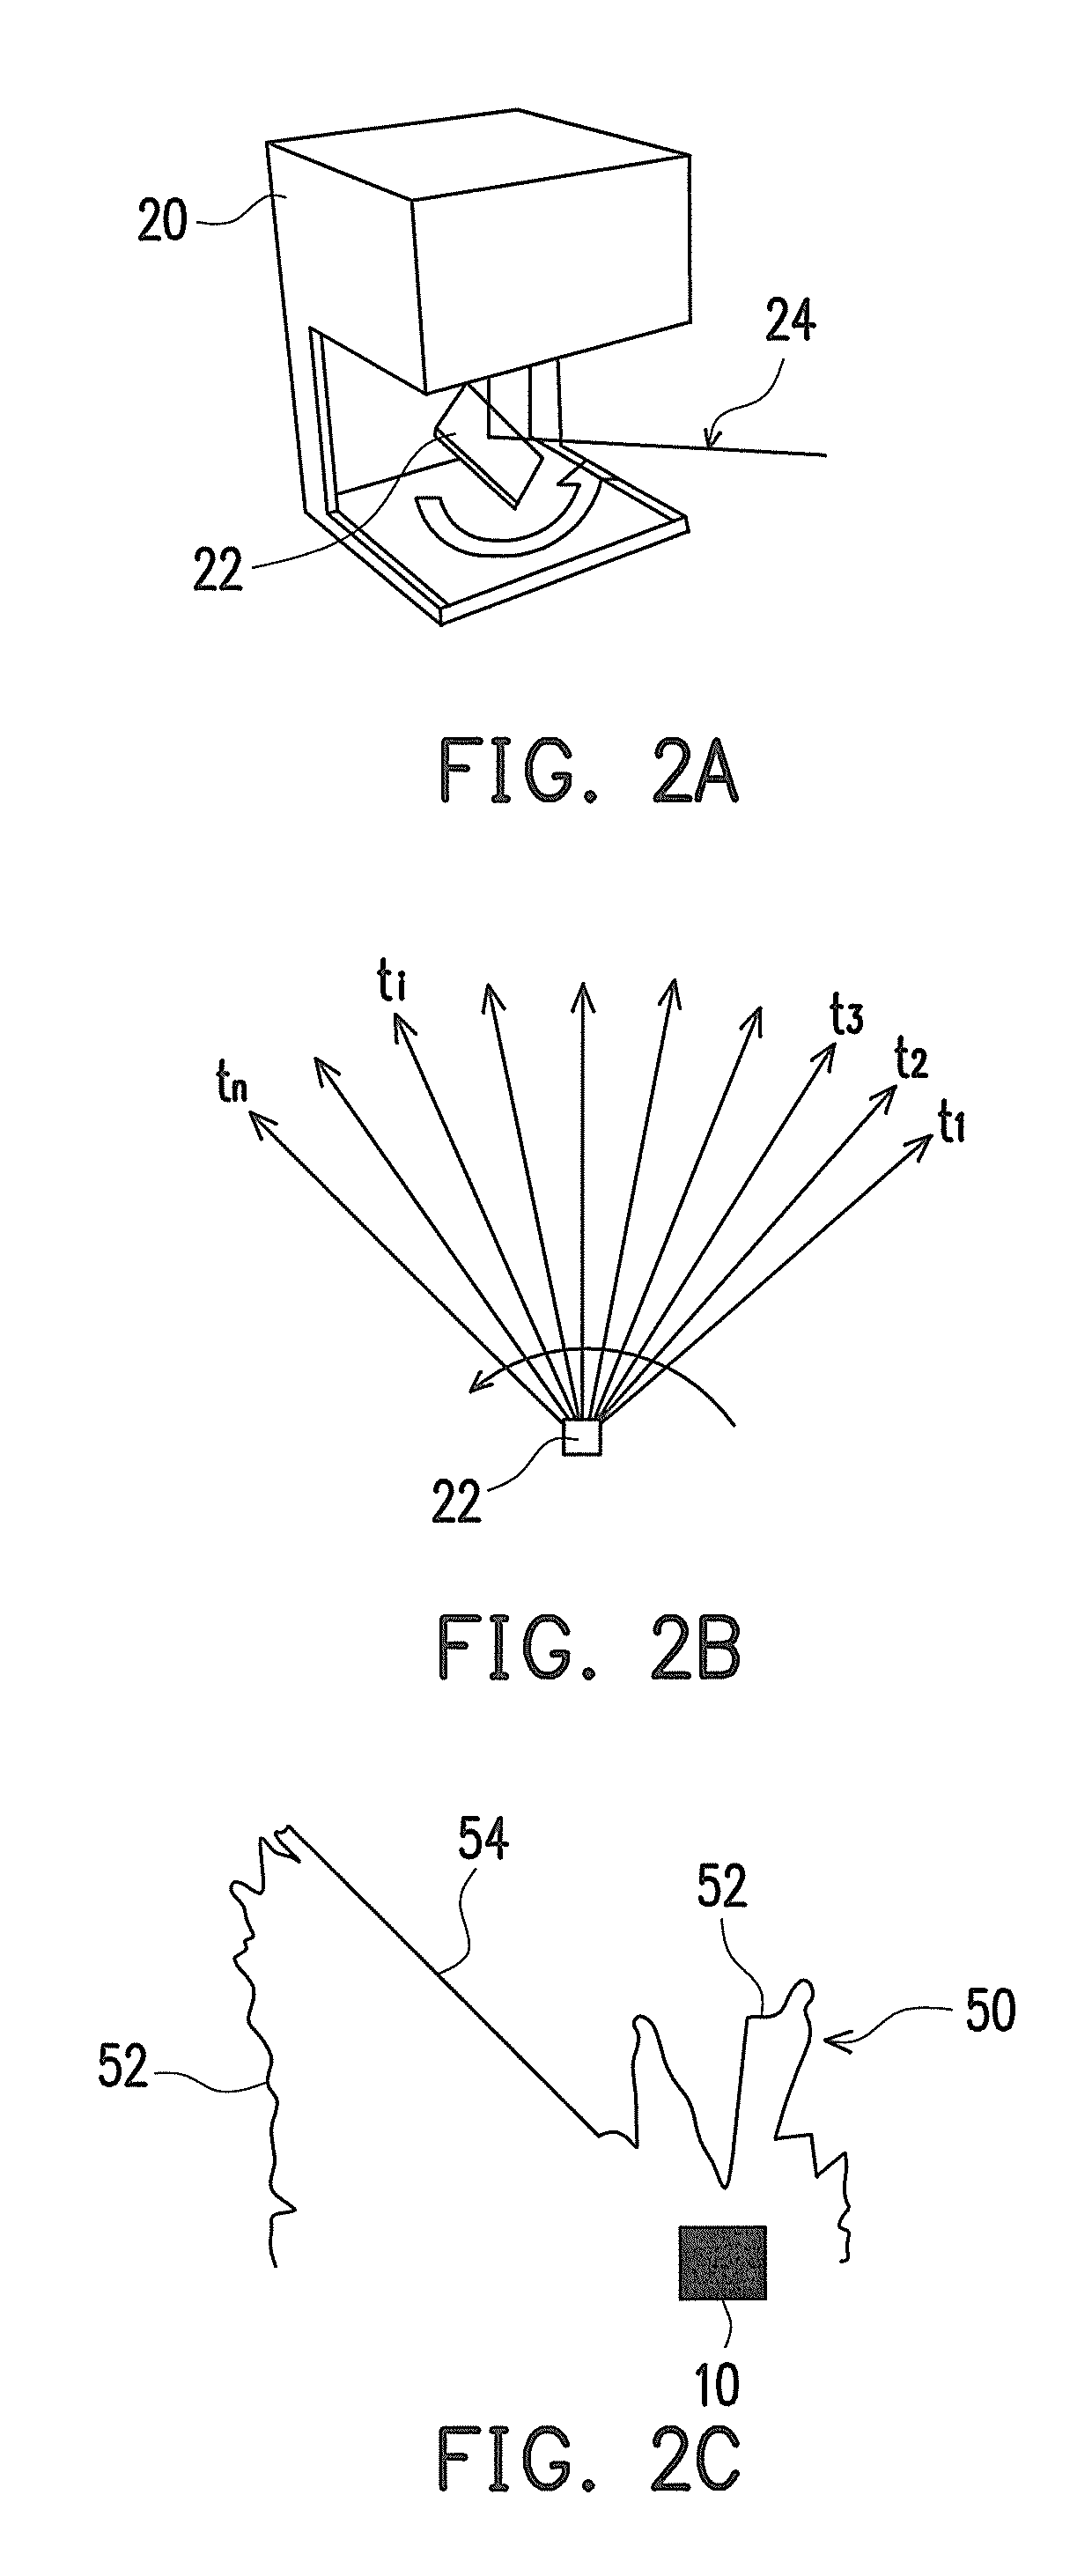 Self-positioning device and method thereof